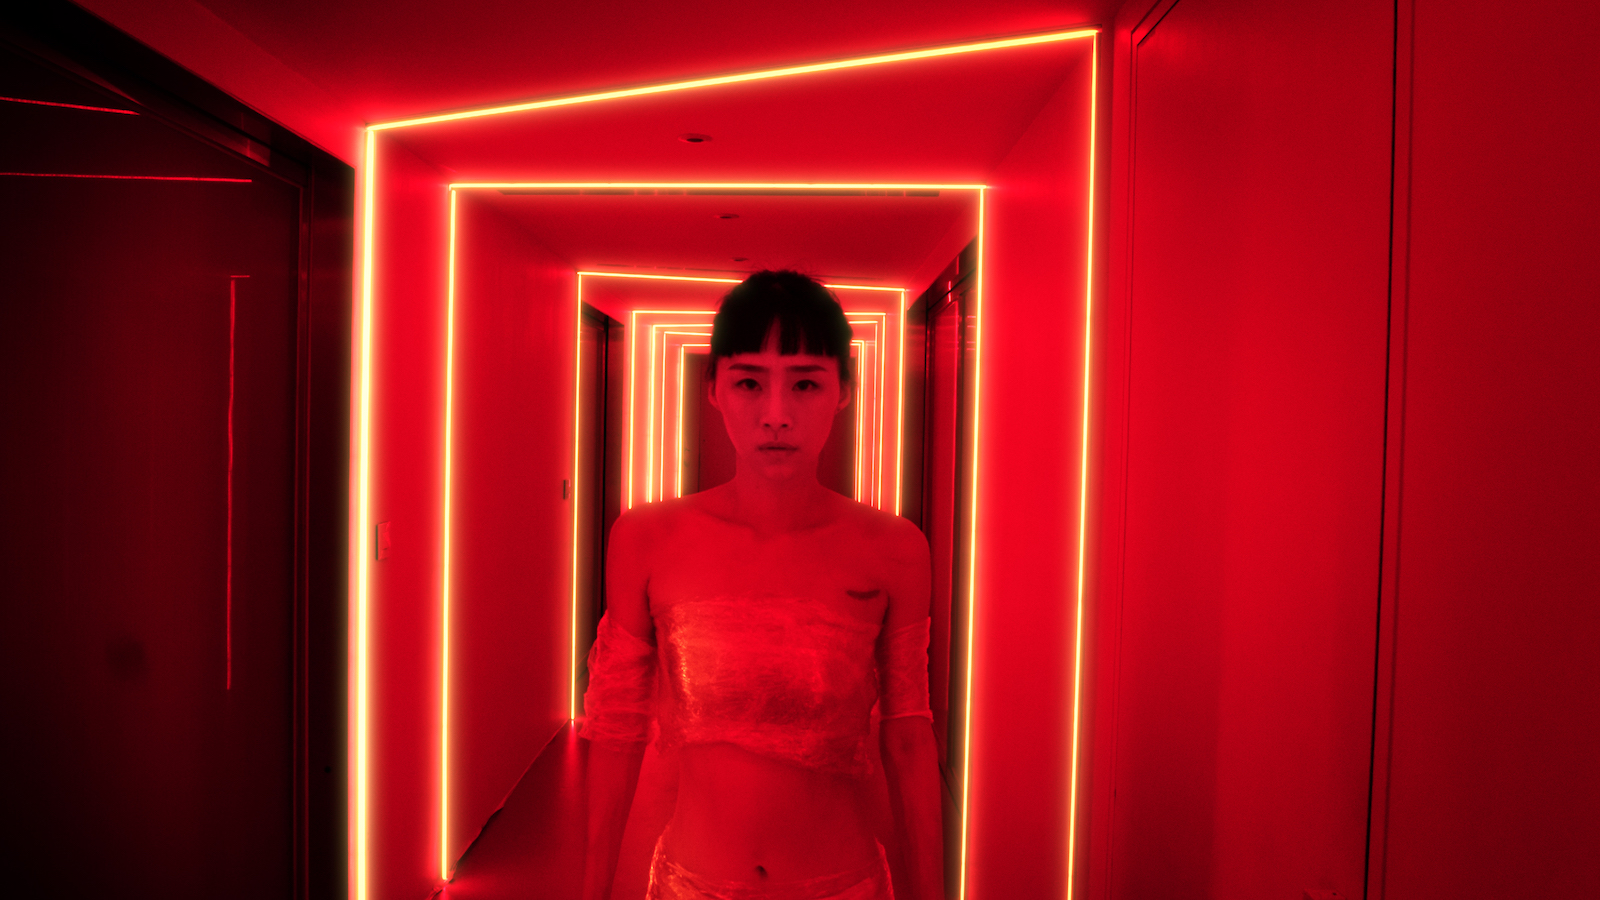 A woman stands in a dark, red-drenched hallway, looking at camera intensely.